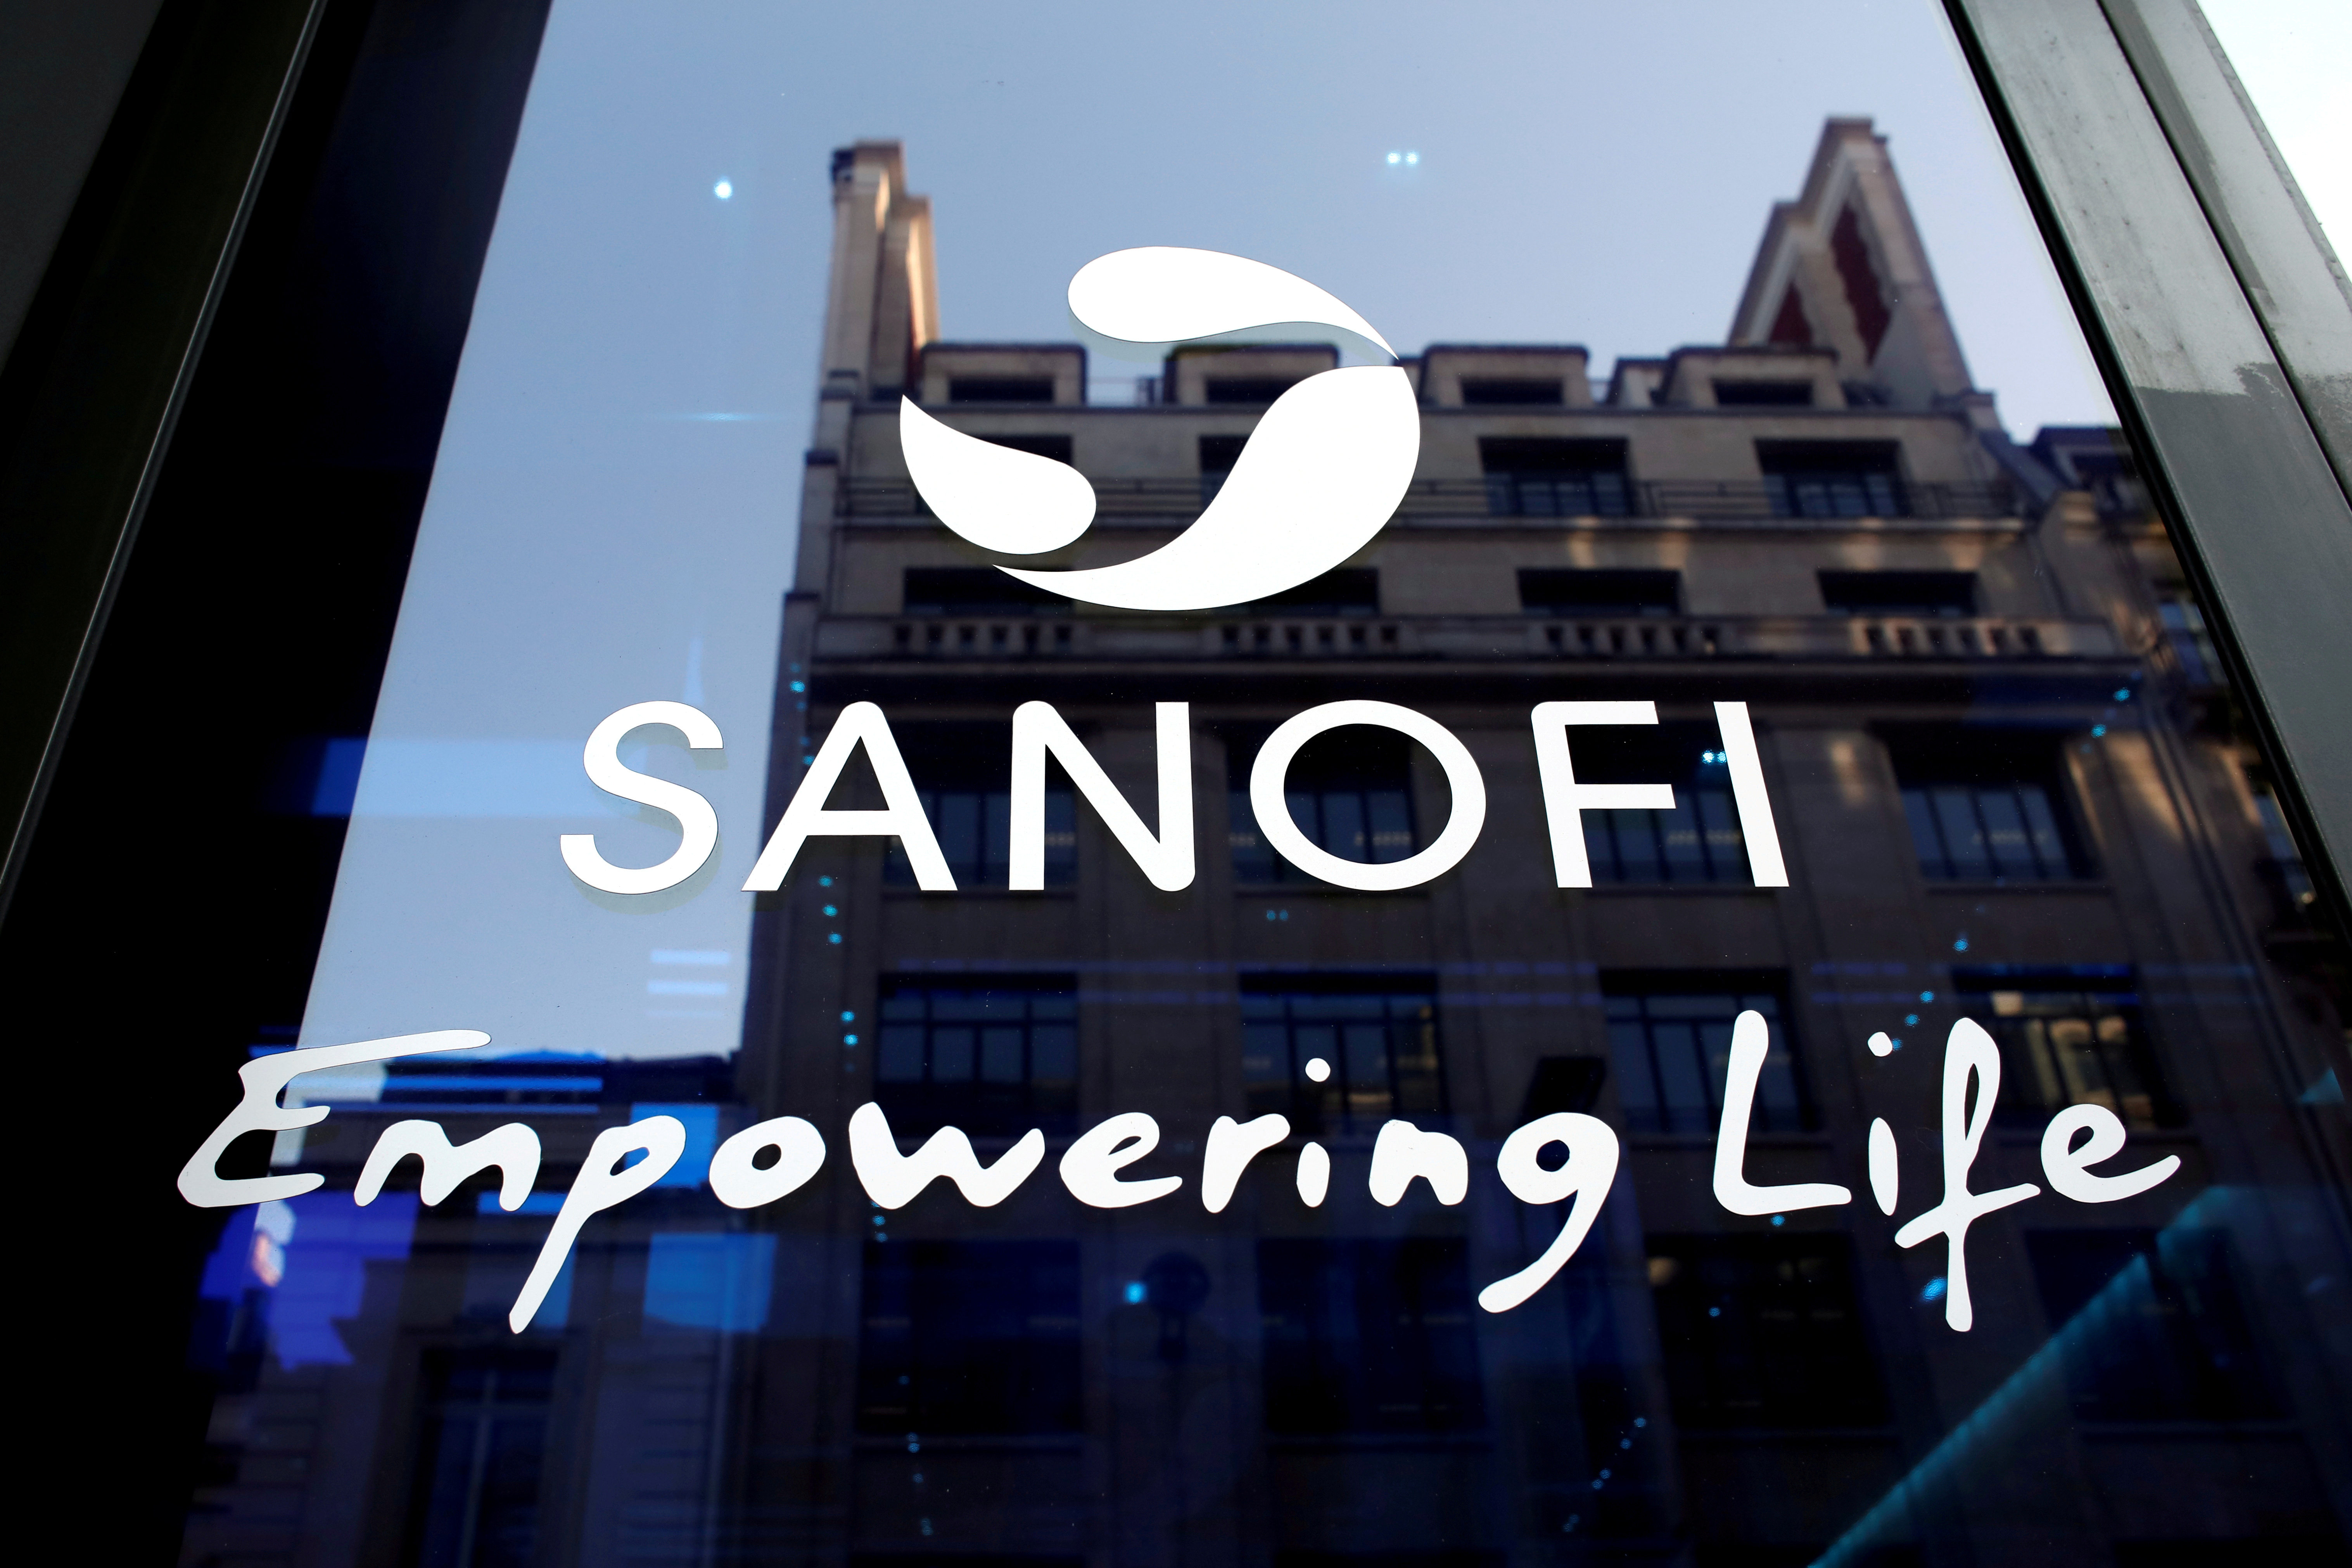 Sanofi logo is seen during the company's annual results news conference in Paris, France